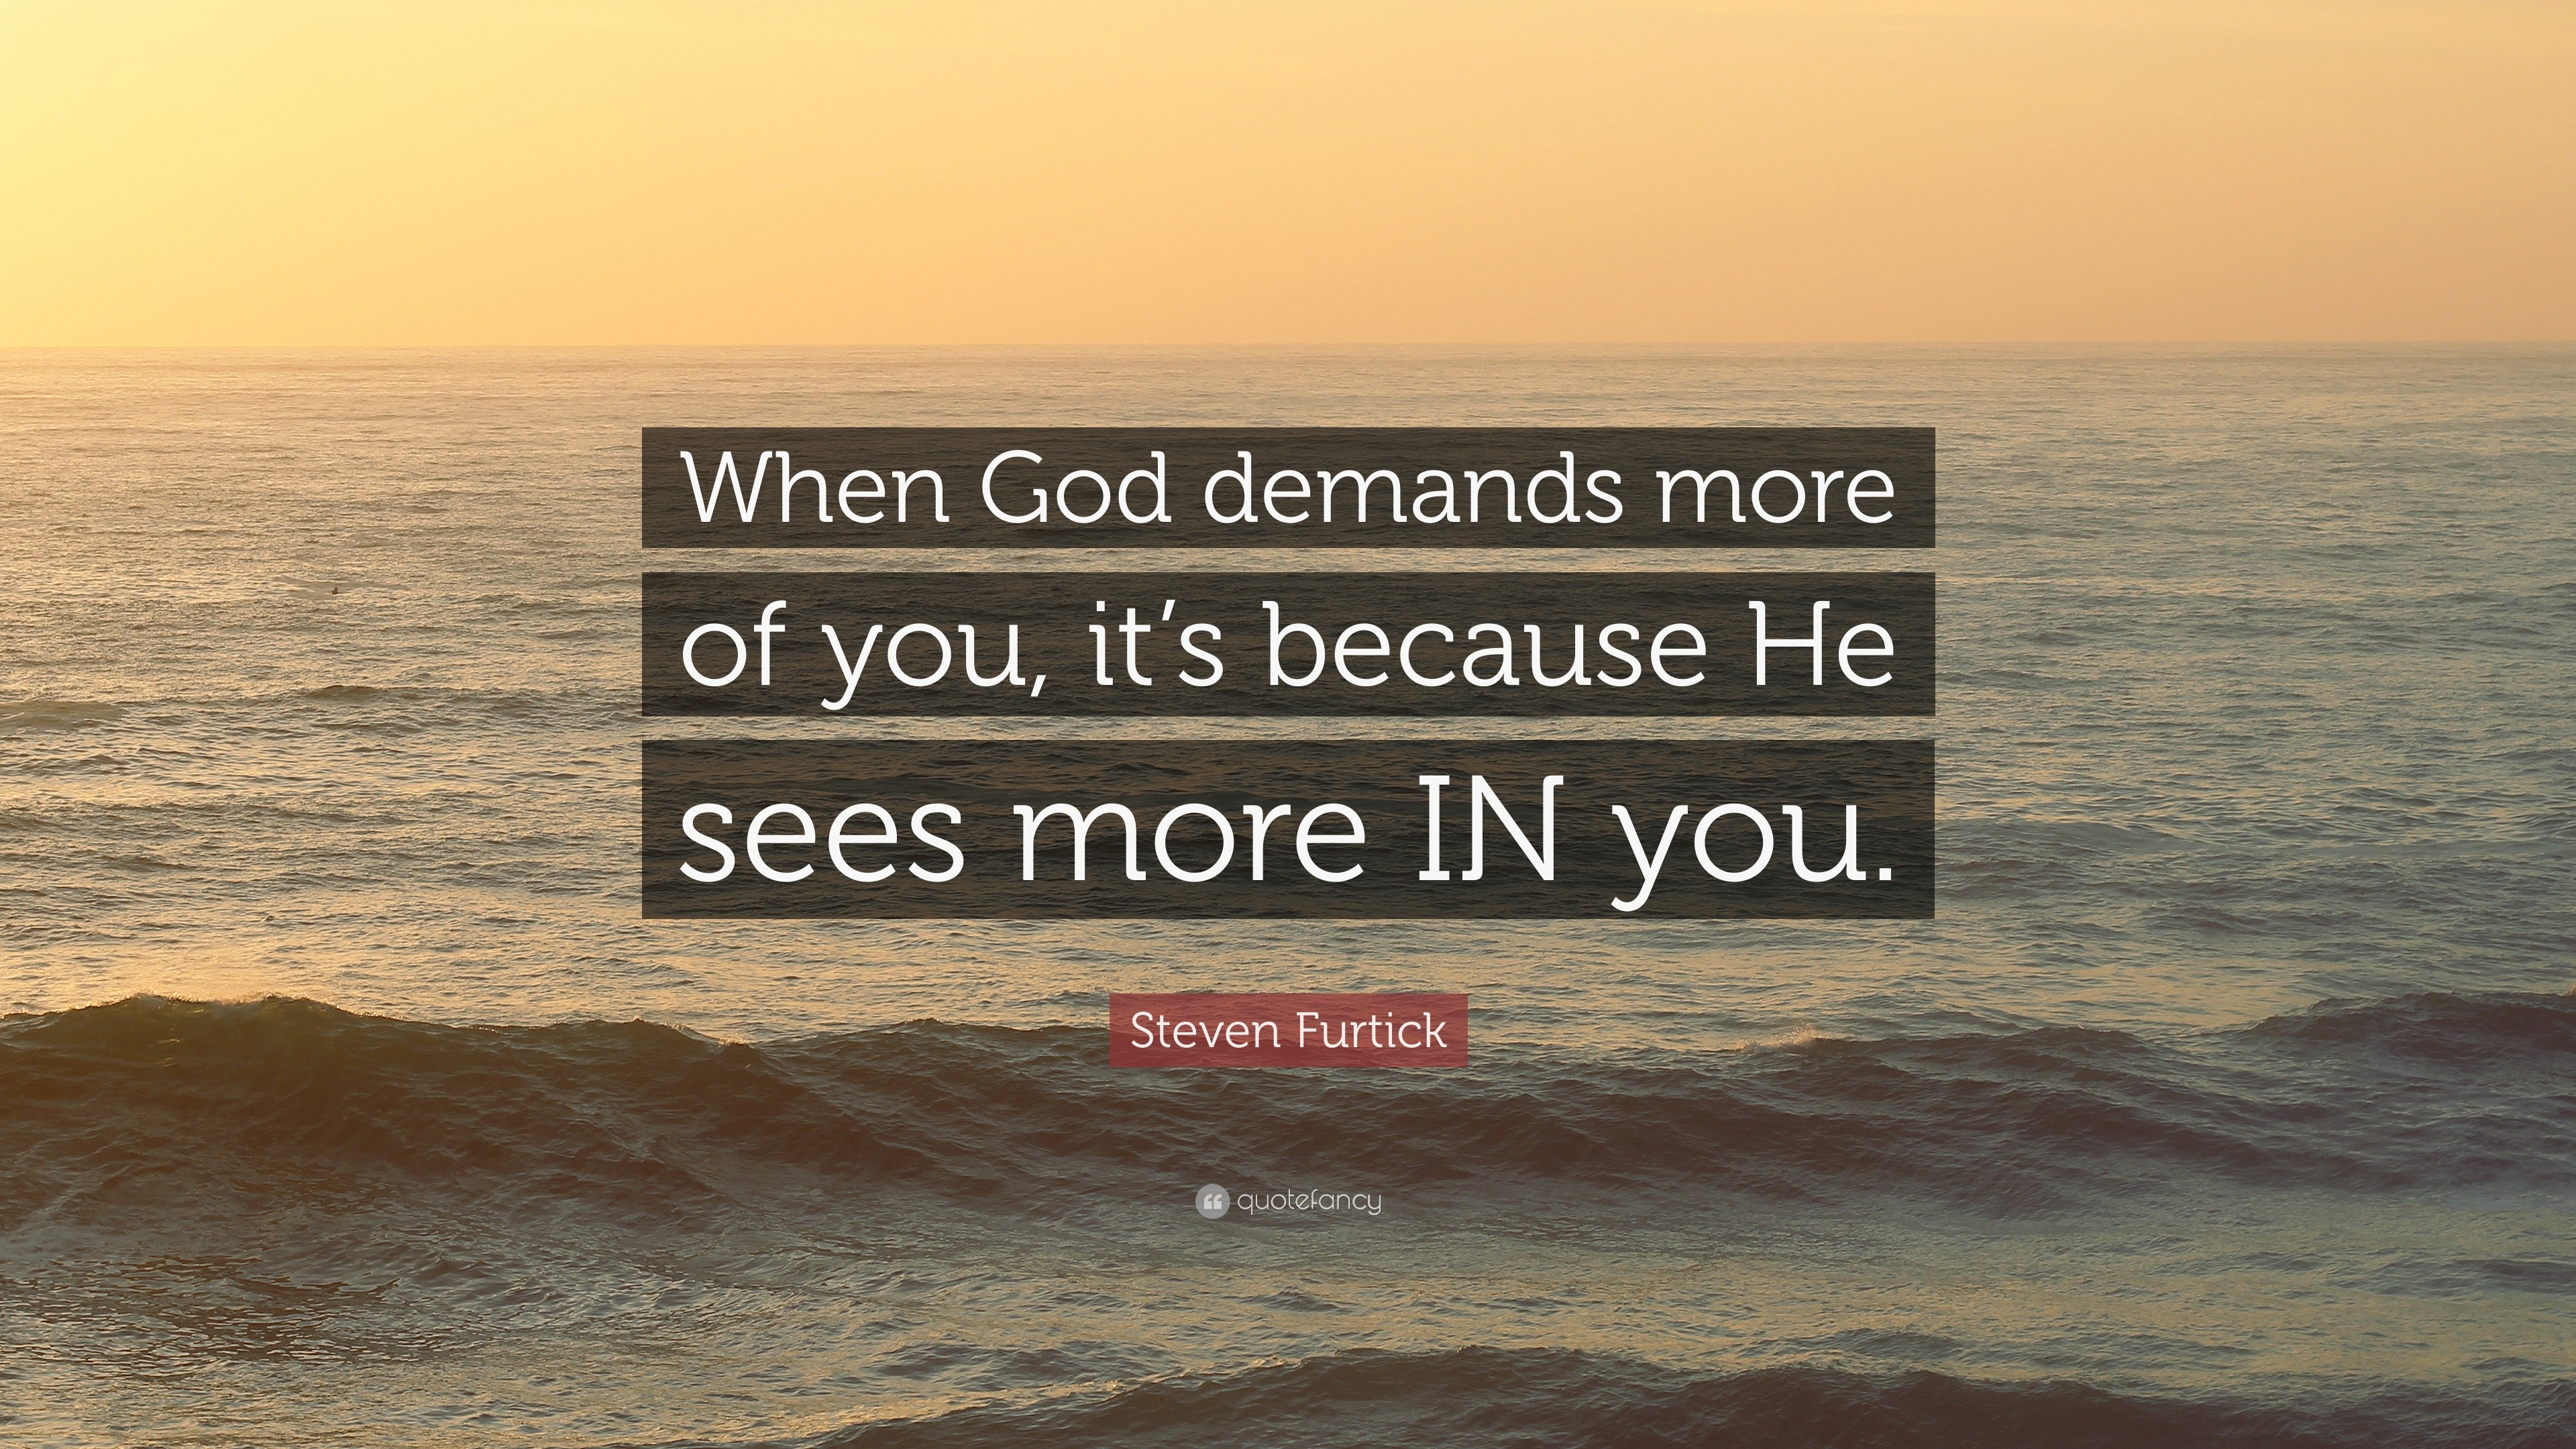 1740083 Steven Furtick Quote When God demands more of you it s because He